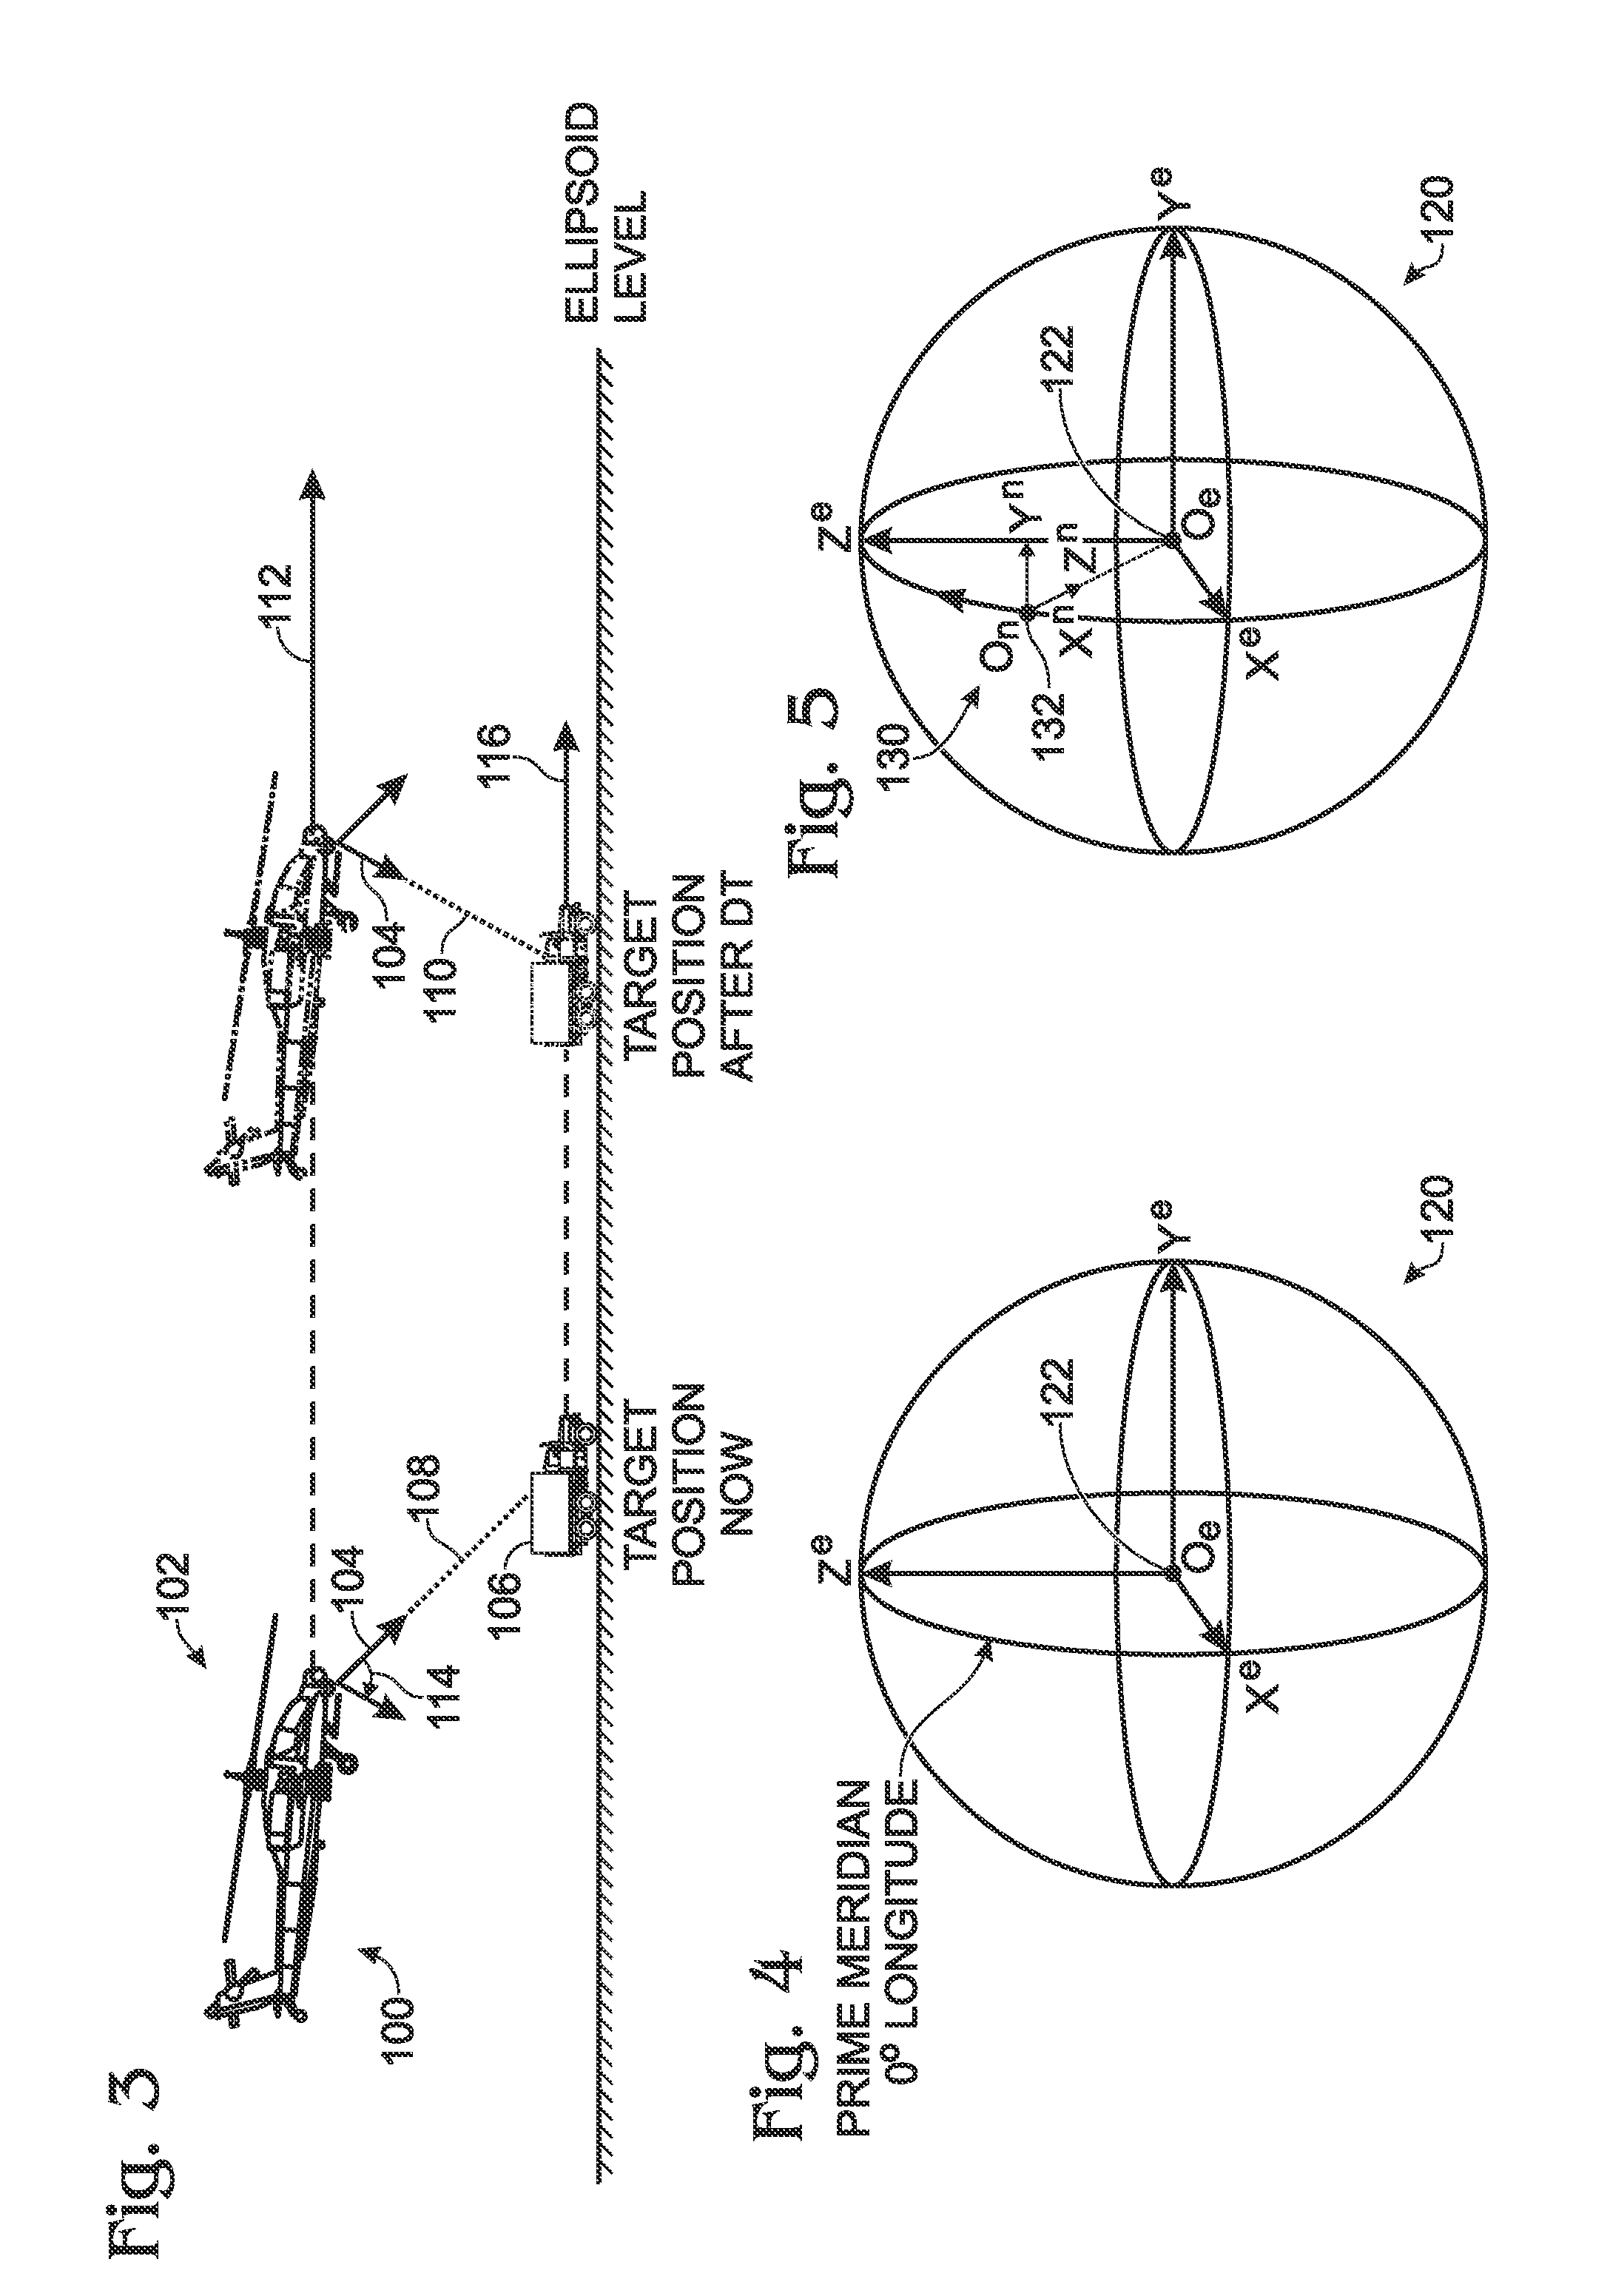 Gimbal positioning with target velocity compensation